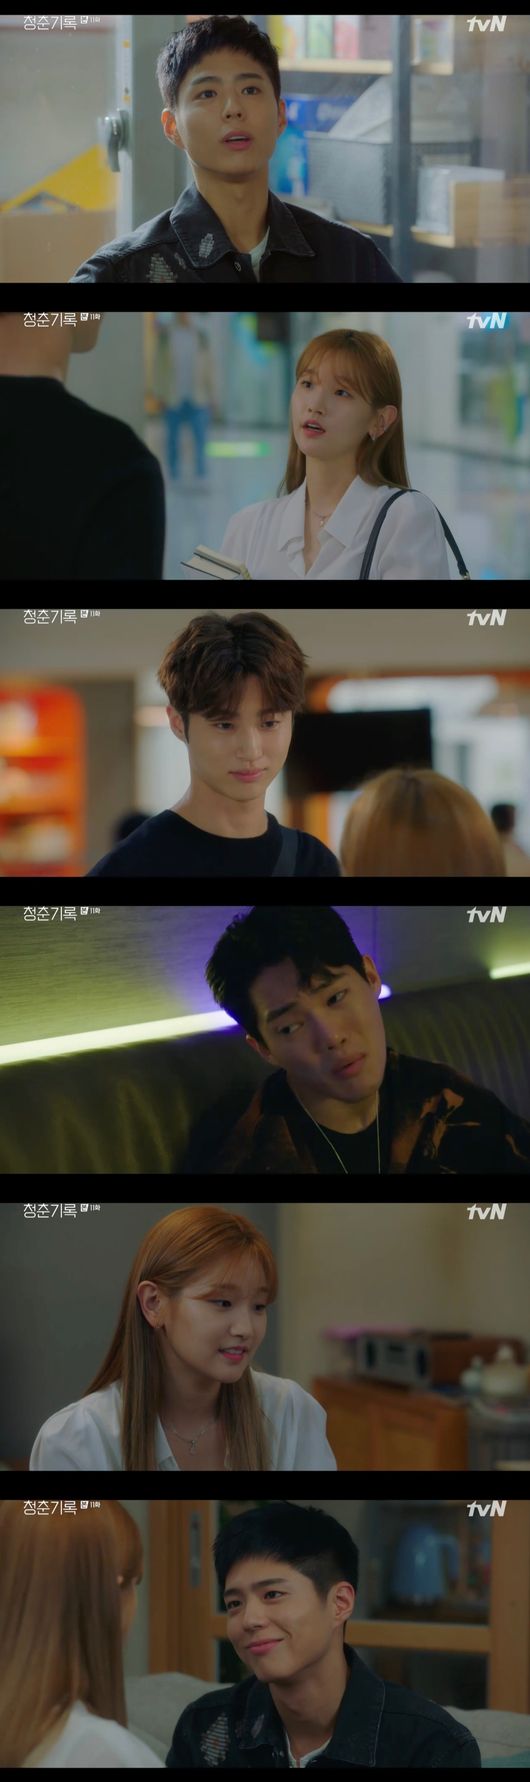 Park Bo-gums first loves Seol In-ah and Byeon Wooseok stepped out in person, with Record of Youth Park Bo-gum embroiled in sexual minority rumors.On TVN Record of Youth broadcasted on the afternoon of the 12th, when I heard the news of Charlie Jung (Lee Seung-joon)s death, I told Byeon Wooseok, I had an absent call a few days ago.I was very surprised, Ill be going to the mortuary later, said Sa Hye-joon (Park Bo-gum).On this day, Record of Youth Kim Lee Young (Shin Ae-ra) shook his head at the popularity of Sa Hye-joon, who suddenly emerged.Kim Lee Young also said, I can not sleep for a while. I should have won a rookie prize. I can not lift my face in front of my father.But Won Hae-hyo said, Do you want me to tell you that I can not sleep again? I am a drama that Hye-joon enters this time.Previously, Record of Youth Kim Lee Young forced him to meet with Lee Tae-soo (Lee Chang-hoon), who had a bad performance in the past to make Won Hae-hyo appear in popular dramas.Kim Lee Young said, Why would I deal with such a person if I were you? My mother does things that she really hates for you.However, Won Hae-hyo ignored Kim Lee Youngs backdrop, saying, I told the director that Catch casting Park Do-ha told me.Record of Youth Lee Min-jae (Shin Dong-mi) fought Sa Hye-joon, who went to the police station to investigate the references related to Charlie Jeong without telling himself, Are you a kid with no mind?I heard from the Hollywood agency again, and a world-class director is coming to see you, said Lee Min-jae, who said, Do not you know what you are in?Especially, Lee Min-jae said, Is it more important than the death of one person? Do you want to live as a human being calculating until that moment?Do you know how many people want you to go down at this moment? You know there are still a lot of evil. Why do you keep feeding them? But Record of Youth Sa Hye-joon said, Some people support me well. Look at the process of becoming a star. Its a miracle. How human power.I know my sisters heart, but thank you, but please know my heart that I want to put a flower on my way to the teacher. In addition, Sa Hye-joon finally handed a tissue to Lee Min-jae, who showed tears, and added, What is my sisters weakness? Can you protect the universe star Sa Hye-joon?Record of Youth An Jeong-ha (played by Park So-dam) met Won Hae-hyo, who was stable: I always appreciate you, Ive set up a shop, but there arent many customers, so Im going to sort you out.I think I will starve to death while resting in a complete network. He also said that he would not take charge of the make-up of Won Hae-hyo.I know you guys always call me on makeup business for me, but I want to stop now. Ill only go to certain events, not always waiting. Then Won Hae Hyo said, I like what I told me first. He said, I also like it. I also like it. Thank you for organizing it before I organize it.Record of Youth Lee Min-jae declared war on Sa Hye-joons evil spirits. Lee Min-jae also said, It is a proof that he became a star. Did you check the bankbook?You dont have a room in your house. Move to Gangnam District. Be independent. Record of Youth Kim Soo-man (Bae Yoon-kyung) asked Lee Min-jae, Did you say that Charlie and Sa Hye-joon had a relationship? In addition, Kim Soo-man said, Who is it?If you stay on that floor, you need money. You are not rich, Sa Hye-joon.Lee Min-jae said, Hye Jun has seen me since I was a model. Kim Soo-man said, Is there one or two people who have seen me since model?Im all feeling bad today. Whos seen you since the model? Lee Tae-soo? No. Lets think about it when you shut up. Record of Youth Park Do-ha (Kim Gun-woo) also annoyed Sa Hye-joons popularity.It is very difficult to get the best prize, said Park Do-ha, who drank from daytime. Popularity was given by my fans to click.I do not want to lose as much as I do to Sa Hye-joon. Lee Tae-soo said, I think the downhill is going to be faster.Im really quick to notice, he said to himself, looking at Park Do-ha.Record of Youth Sa Hye-joon, who enjoyed a stable home date, was happy to look at Sa Hye-joon, who was sleeping in his stable home after returning home after work.I support all the choices you make, and you did it to me. Im sorry I didnt have much time together, Sa Hye-joon said to Ahn, who said he would quit his makeup.Im not the only one who cant make it. Im busy. Im the representative of the studio. Sa Hye-joon also said, Did you make it by yourself?I remembered the studio I worked with An Jeong-ha.Record of Youth Sa Hye-joon attended a family meeting, where Sa Gyeong-jun (played by Lee Jae-won) confessed that Sa Hye-joon was popular and stressed.So, Sa Hye-joon declared, I will repay my house debt. Then, Sa Kyung-joon said, Lets move if you have money to pay it. Han Ae-sook (Ha Hee-ra) also said, Yes.If we have money to pay our debts, we will be independent of Gangnam District. Im so sorry for letting you grow up without a room. But Sa Hye-joon was determined.My plan is to pay my debts and buy this house and make my room, Sa Hye-joon explained his plan.After that, Record of Youth Han Ae-sook said, Why do you get confused when your child pays you back?She shared her parents debts with a very knife, saying, Why does her child pay them back?, Sa Young-nam (Park Soo-young) said, She doesnt feel the same.Lee Tae-soo, who met Lee Min-jae after that, said, Sae Hye-joon is too big for this representative. Why do not you hand it over to me at this point?Lee Min-jae shook his head, saying, I am wrong to expect from the representative. Then Lee Tae-soo said, Ill give you a tip. Hye-joon is dating makeup artists.Then at least youre out of sexual minority, he advised.On the other hand, tvN Record of Youth is broadcasted every Monday and Tuesday at 9 pm as a growth Record of Youth people who try to achieve their dreams and love without despairing on the wall of reality.TVN Record of Youth